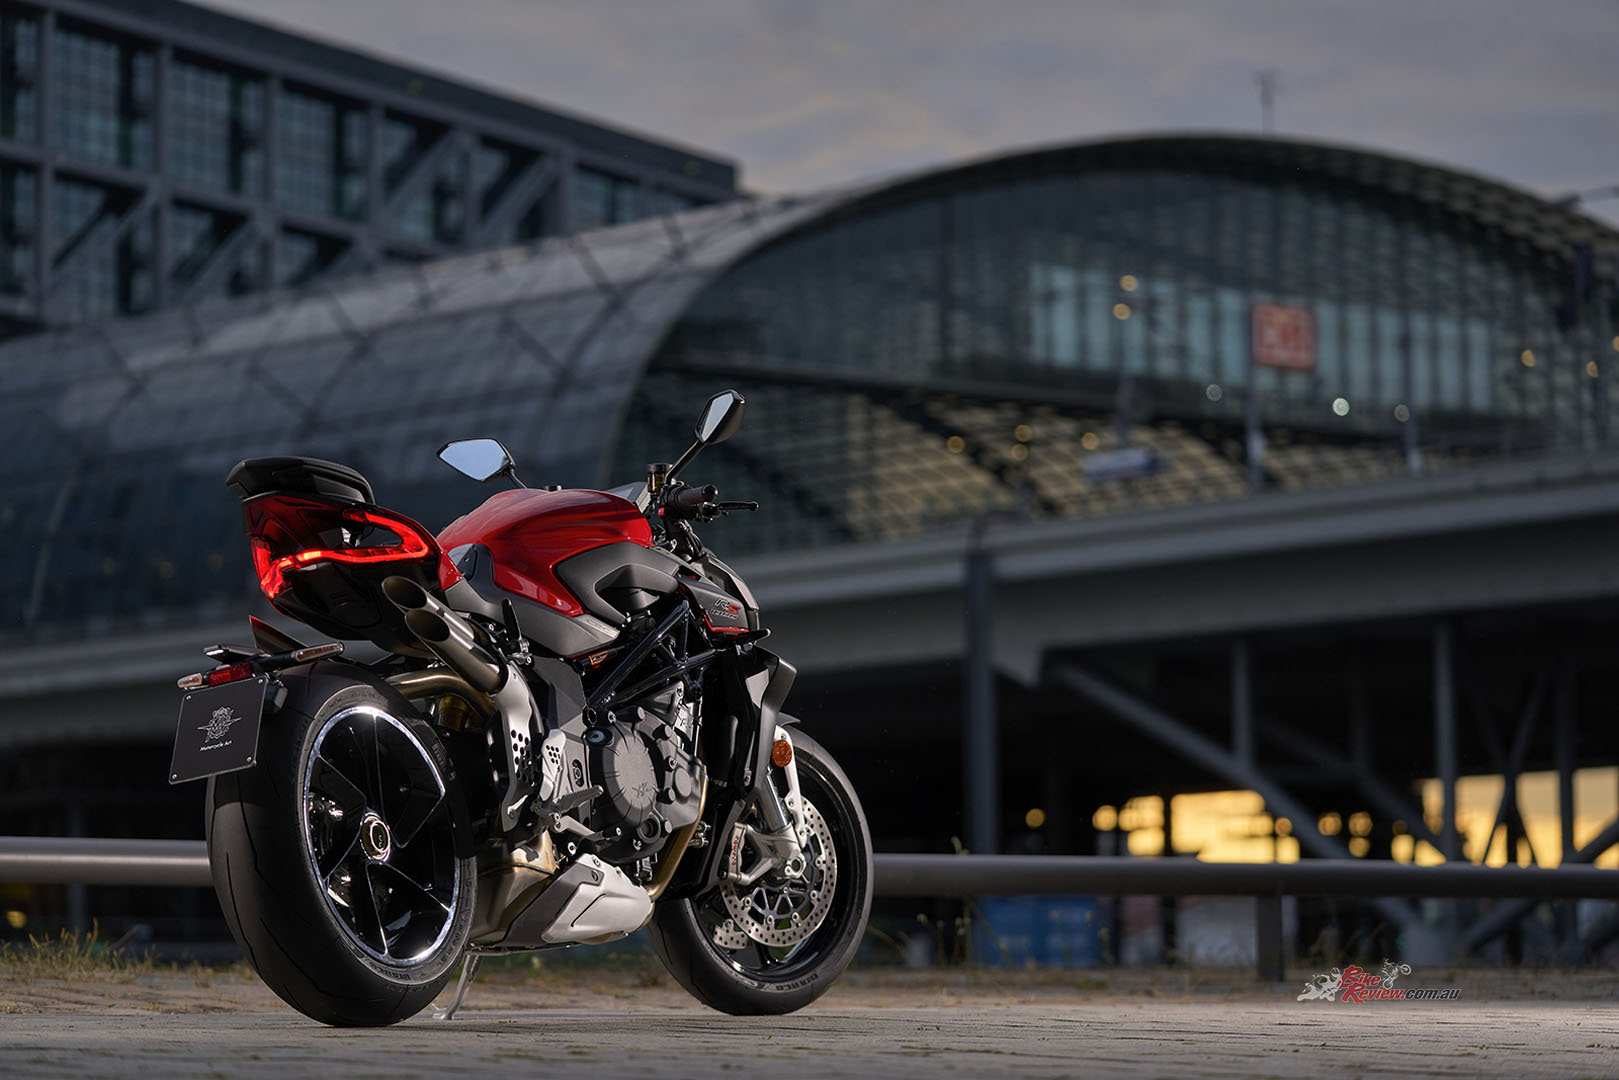 The four-outlet exhaust, an unmistakable MV Agusta stylistic touch, is characterized by the sound-design of the main manifold in full compliance with the Euro 5 regulations.